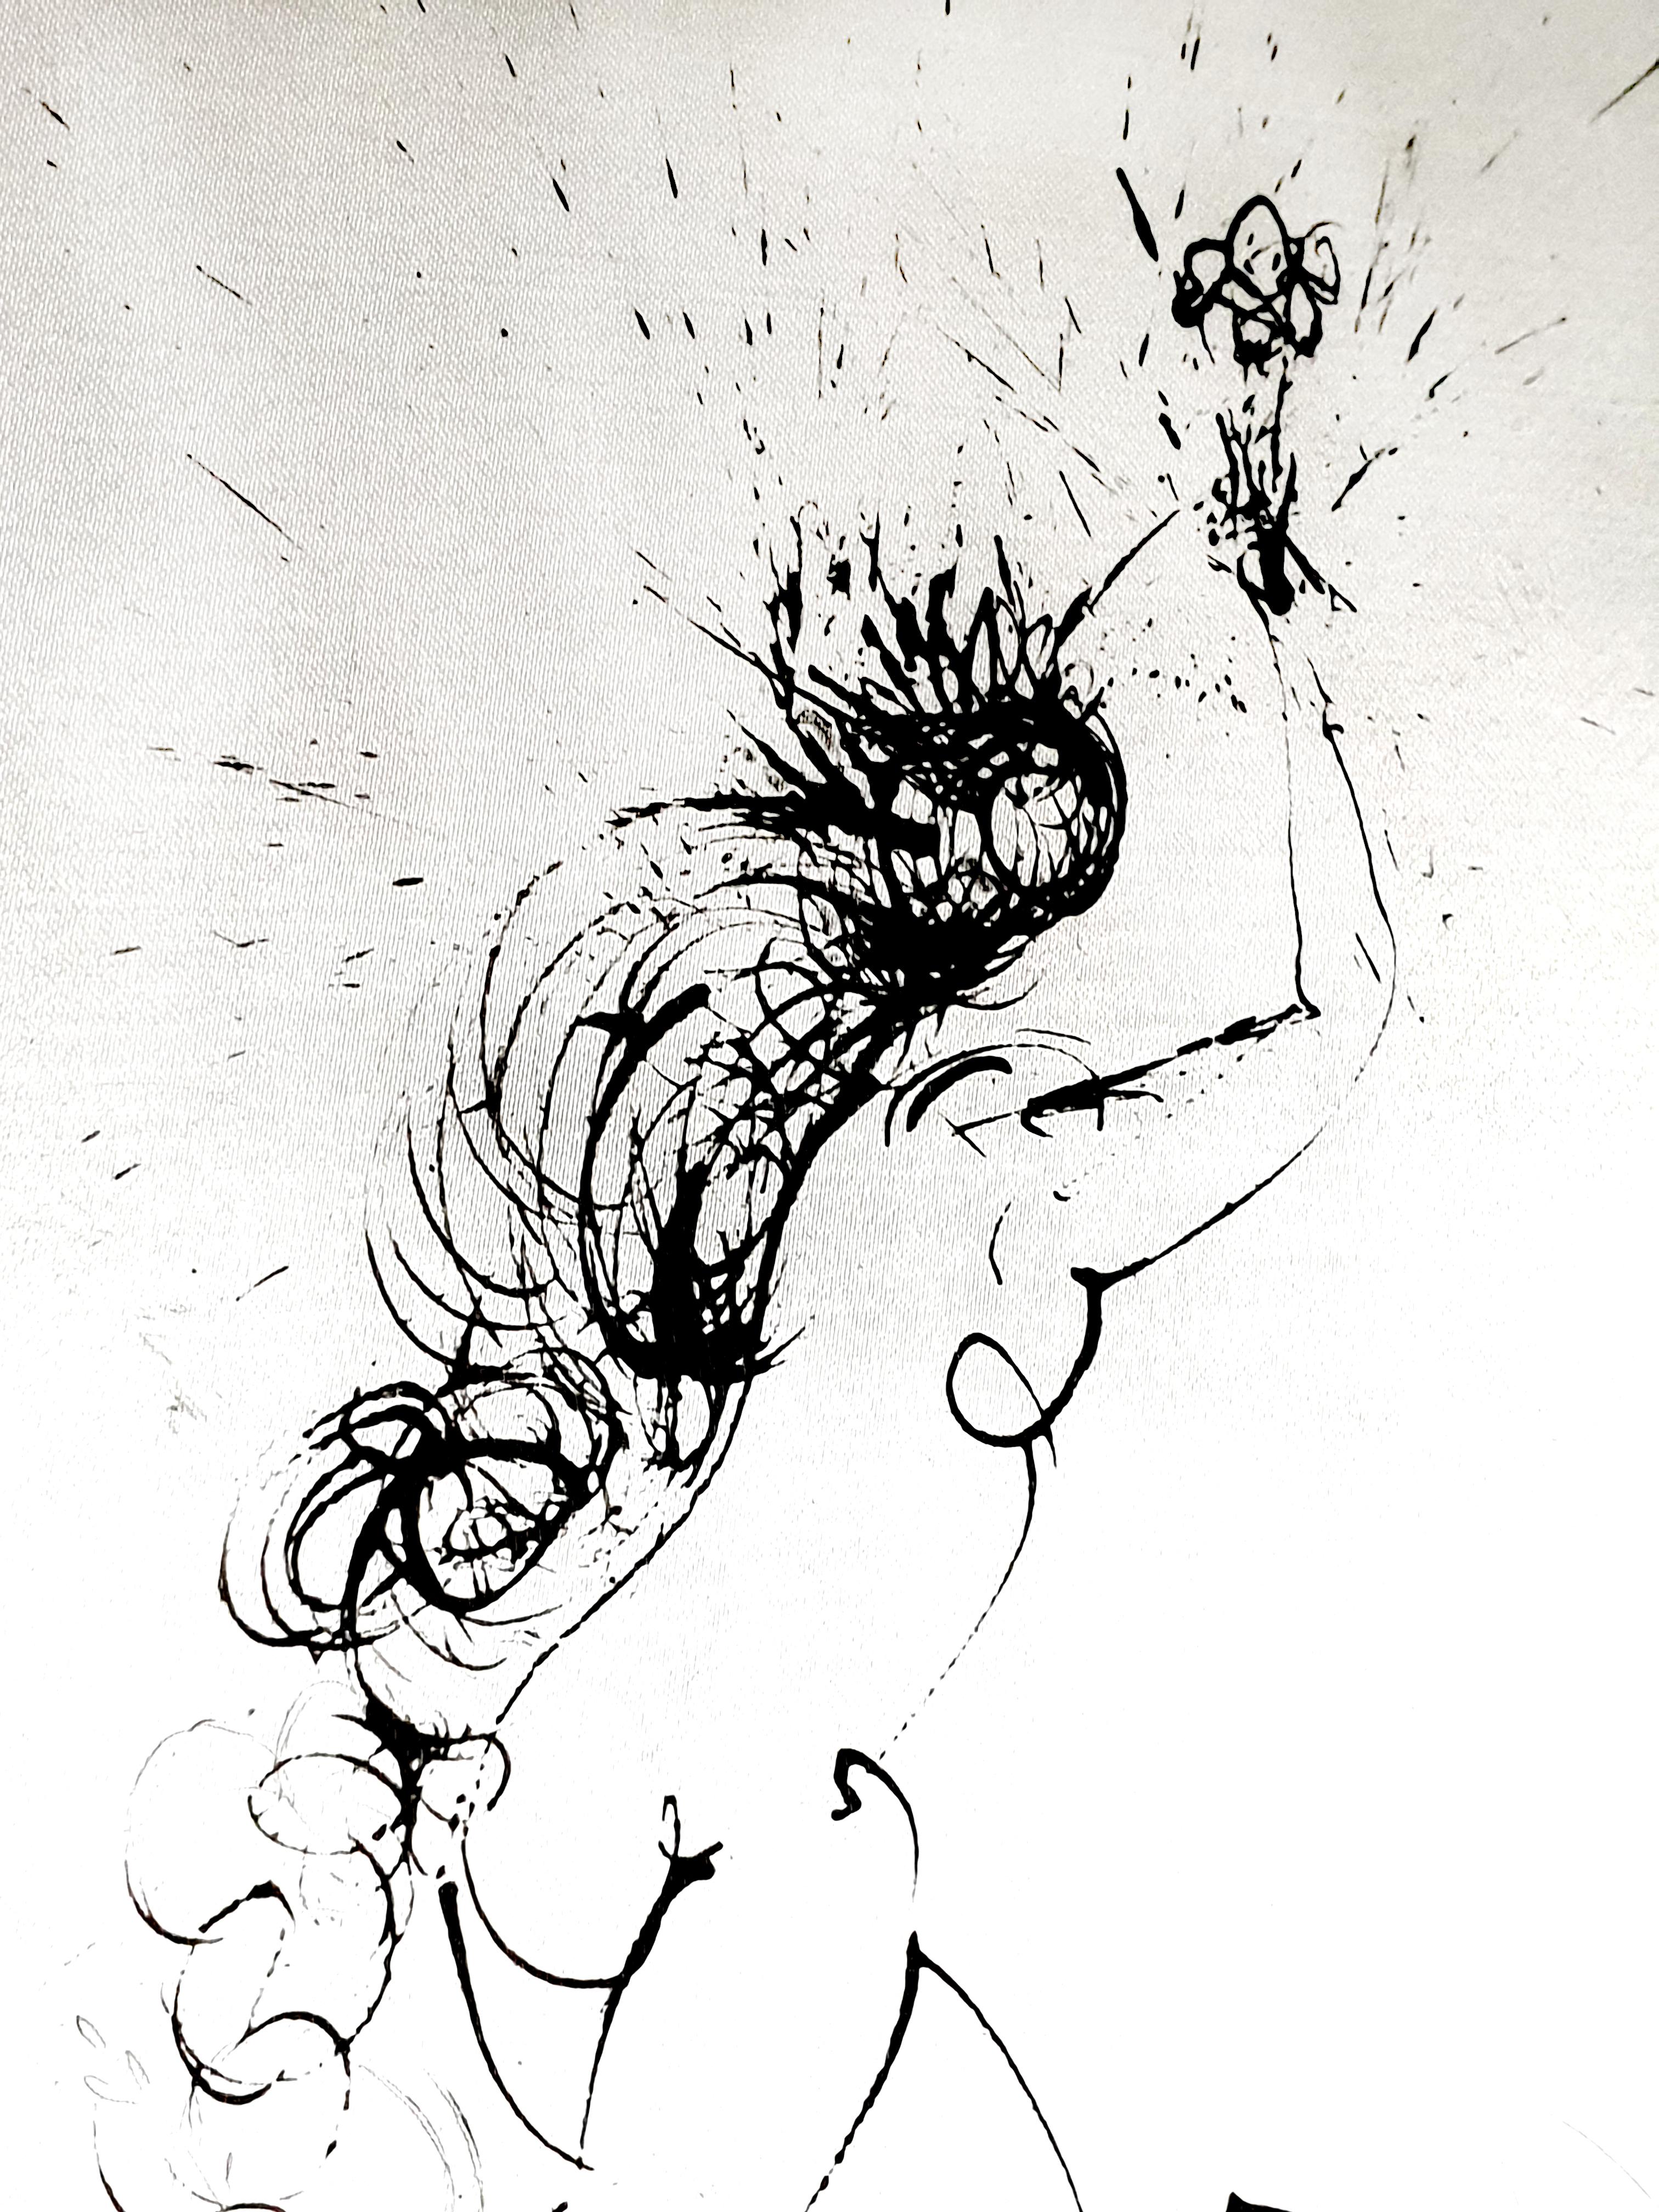 Salvador Dali - Girl With Torch - Original Etching on Silk - Surrealist Print by Salvador Dalí